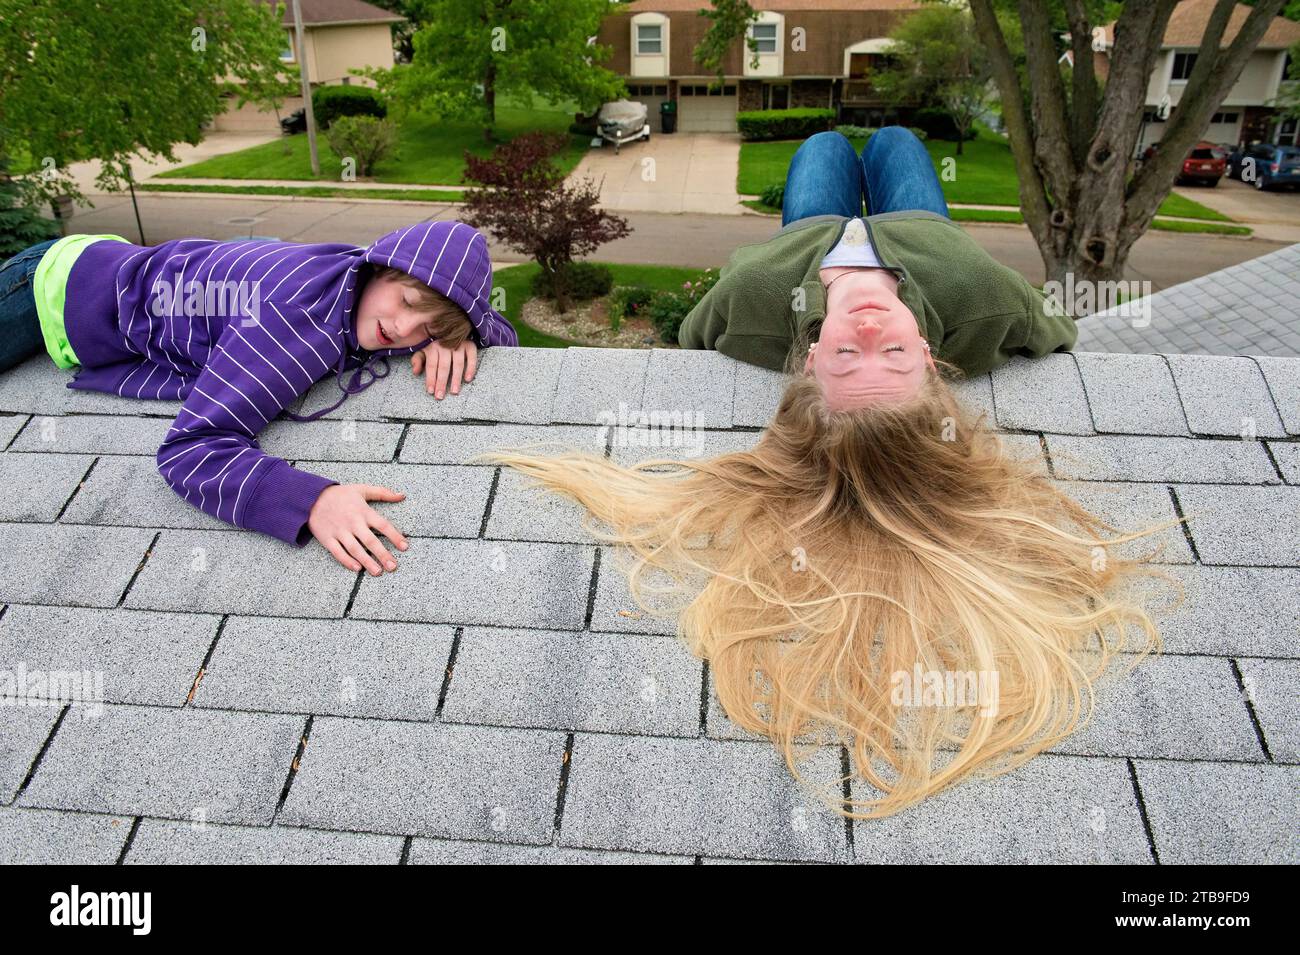 Boy and teenage girl lay on rooftop of house; Elkhorn, Nebraska, United States of America Stock Photo